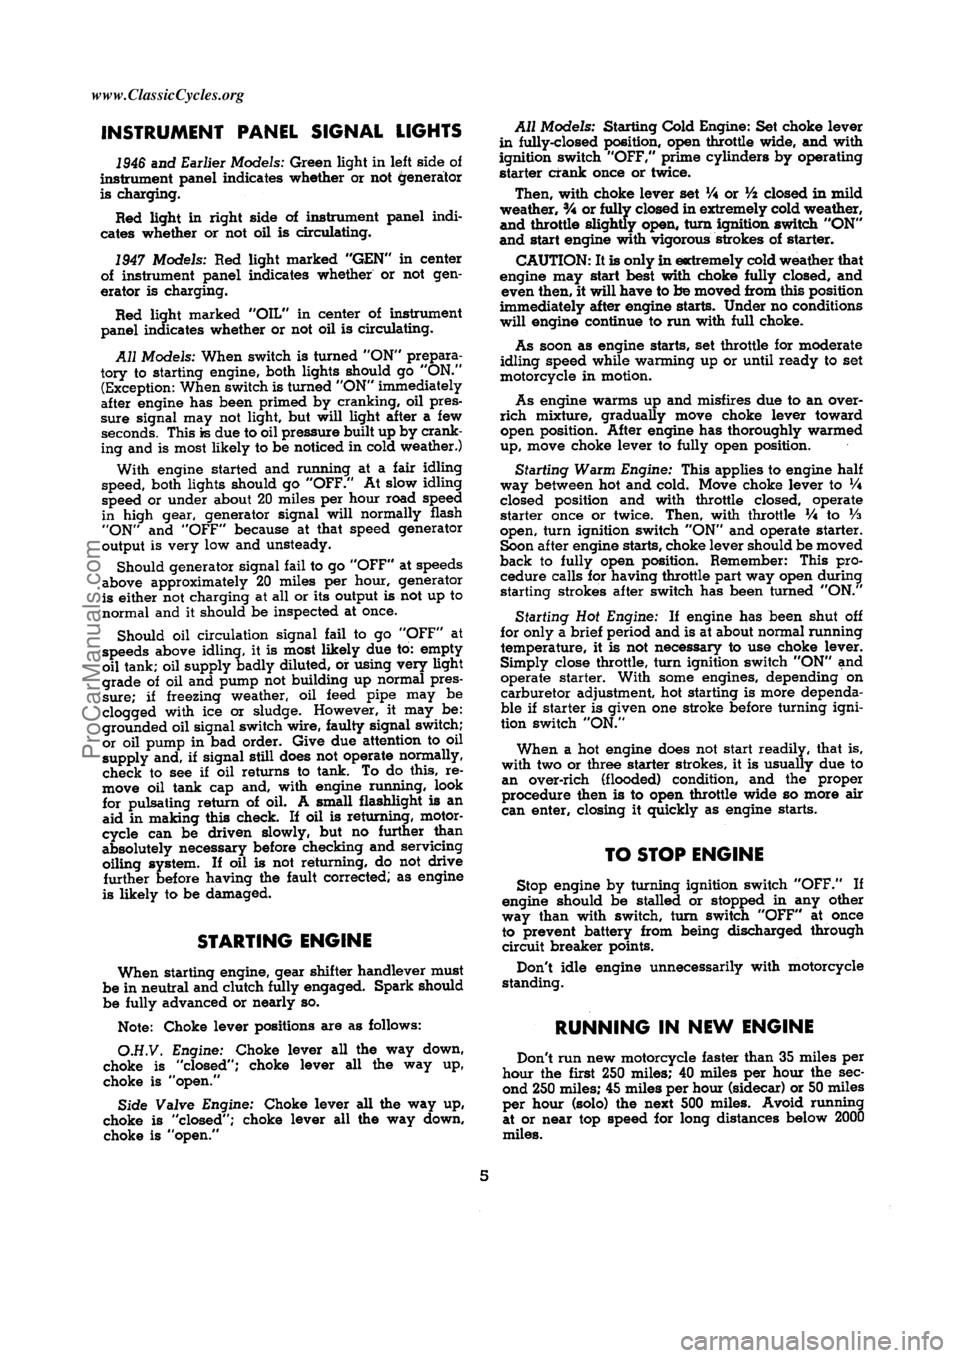 HARLEY-DAVIDSON KNUCKLEHEAD 1940  Service Manual  [5]ProCarManuals.com     www.ClassicCycles.org  